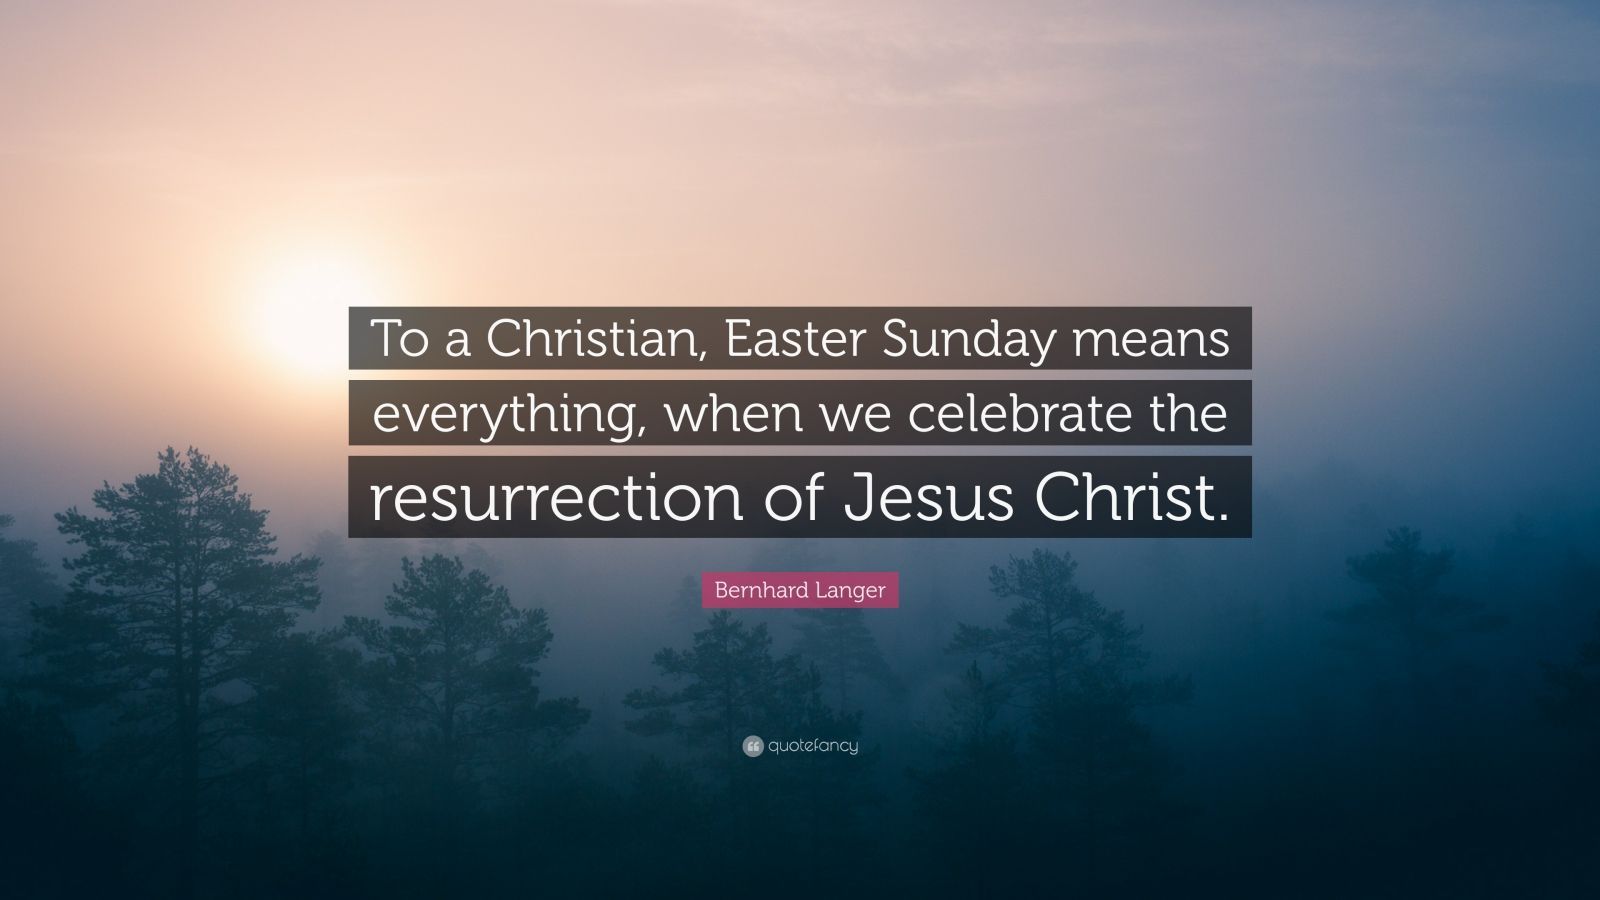 Bernhard Langer Quote: “To a Christian, Easter Sunday means